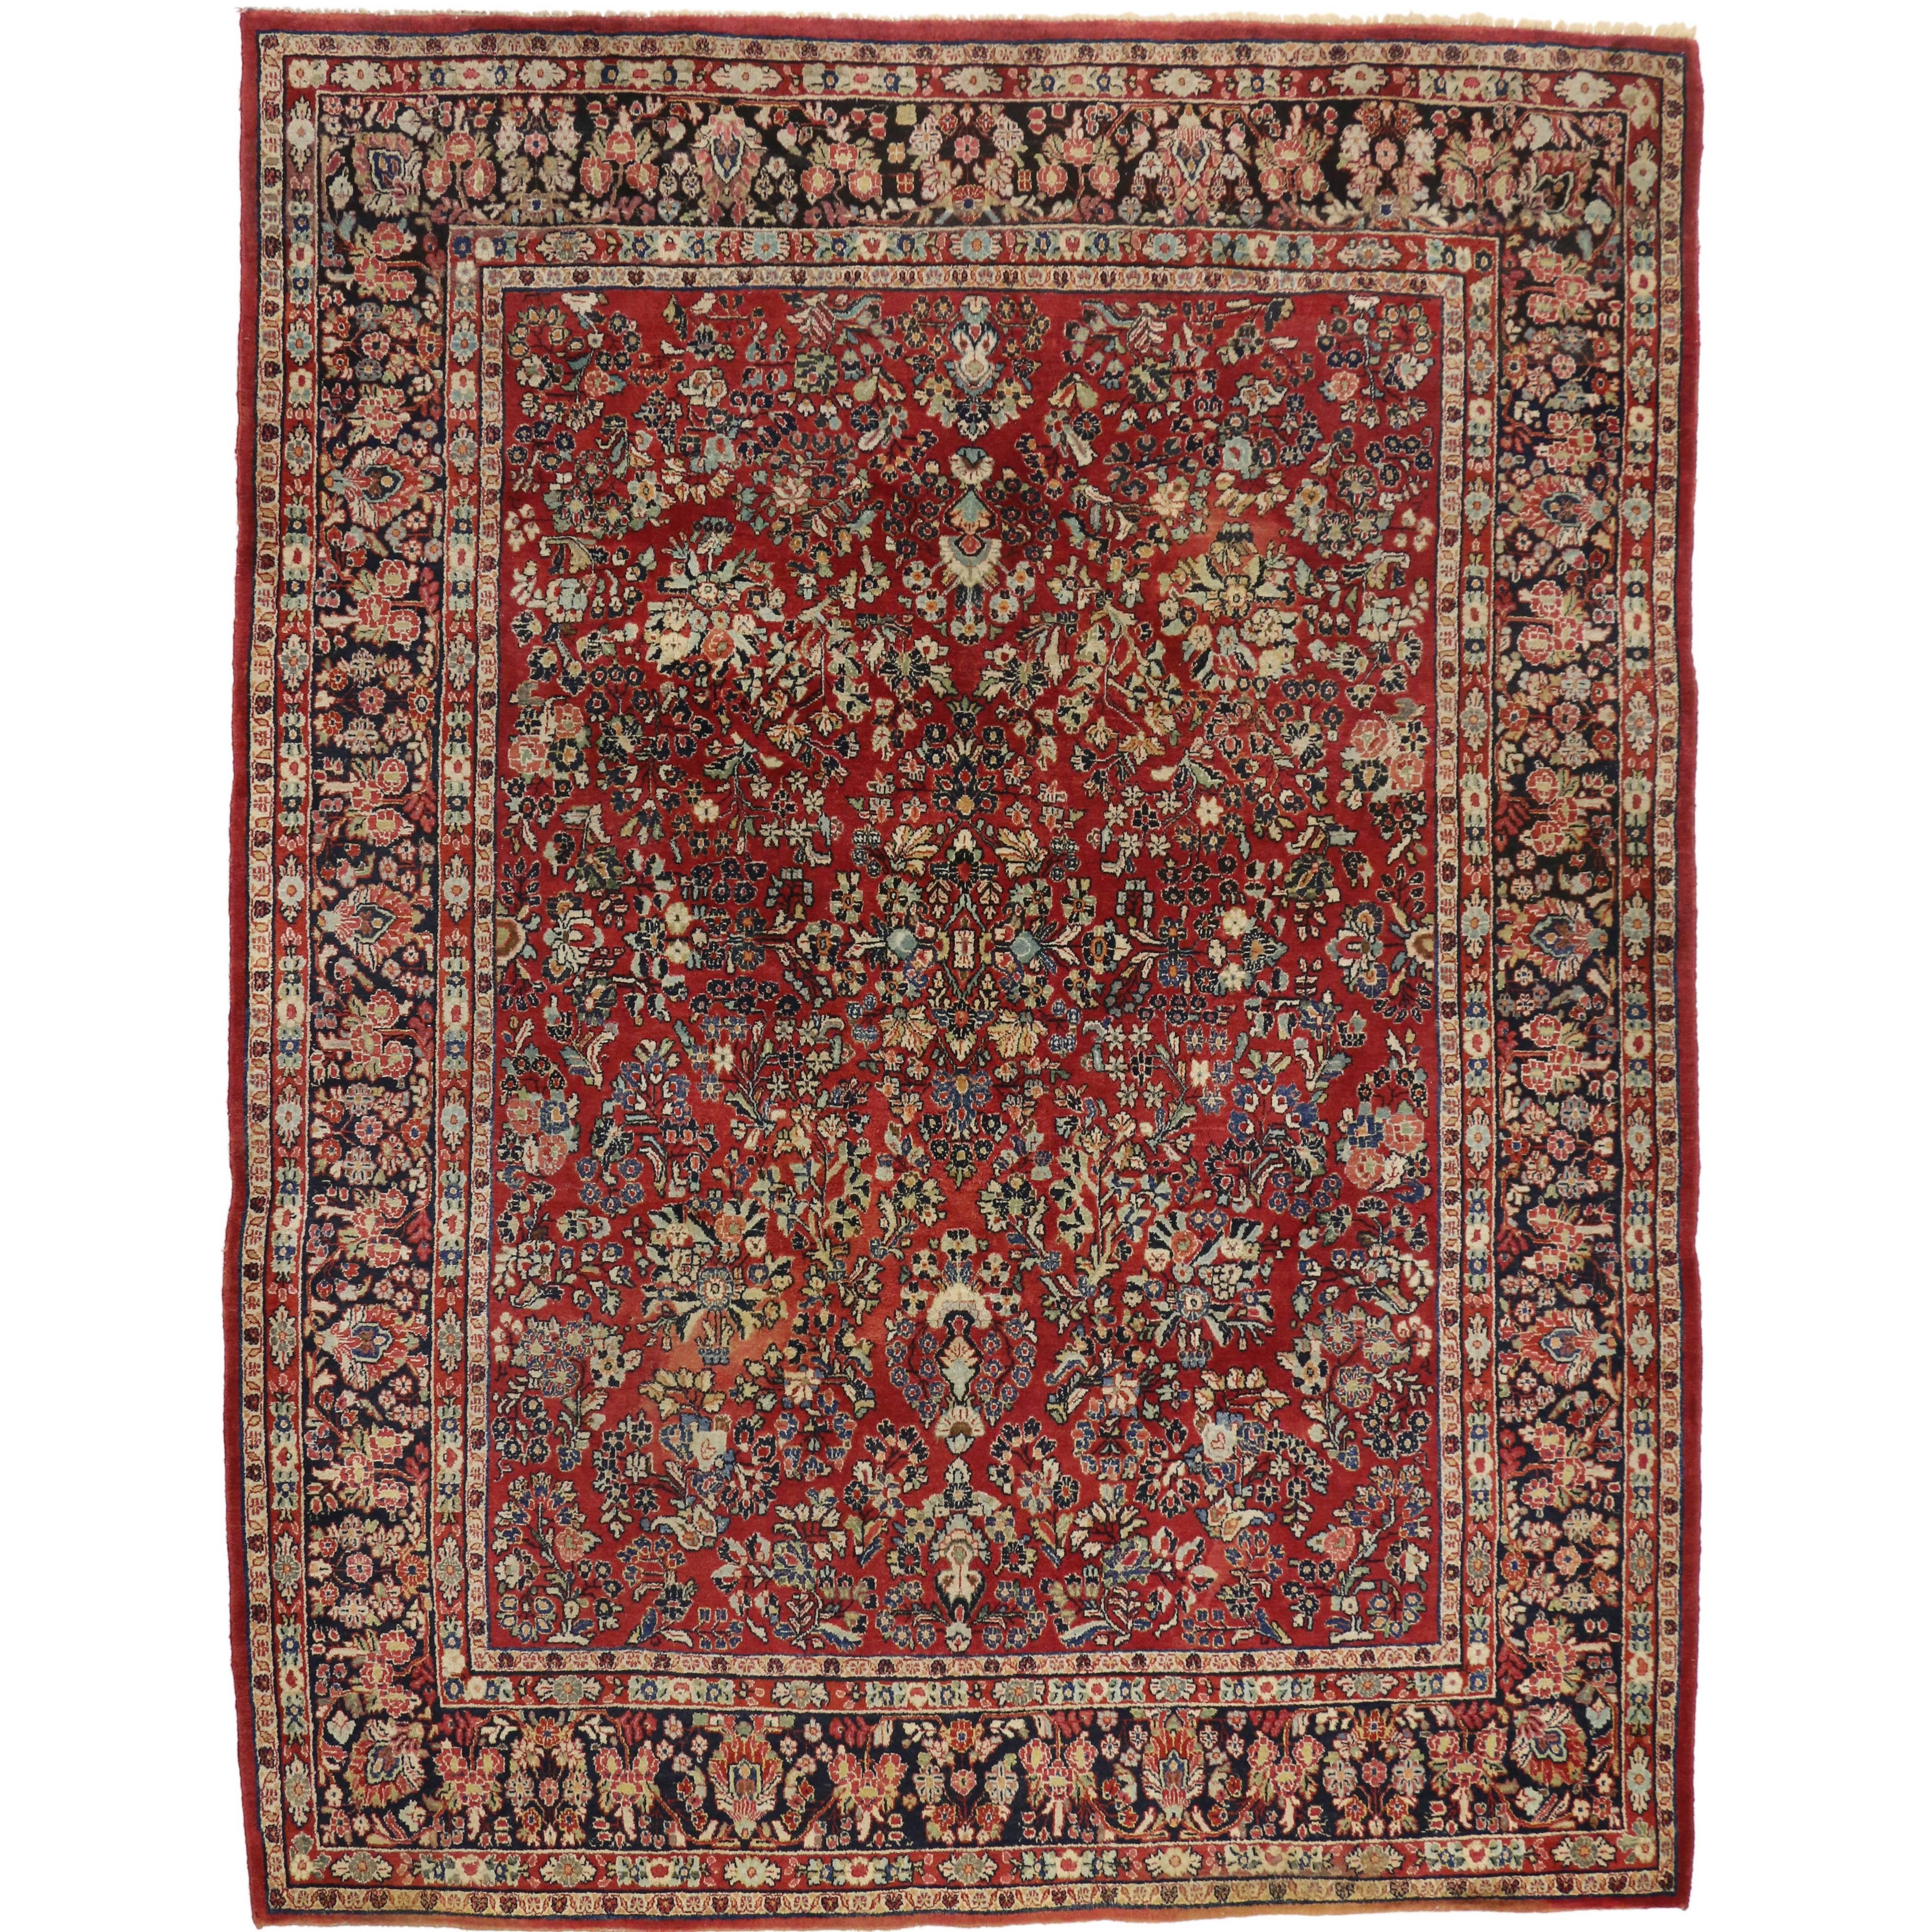 Antique Sarouk Persian Rug with Traditional Style